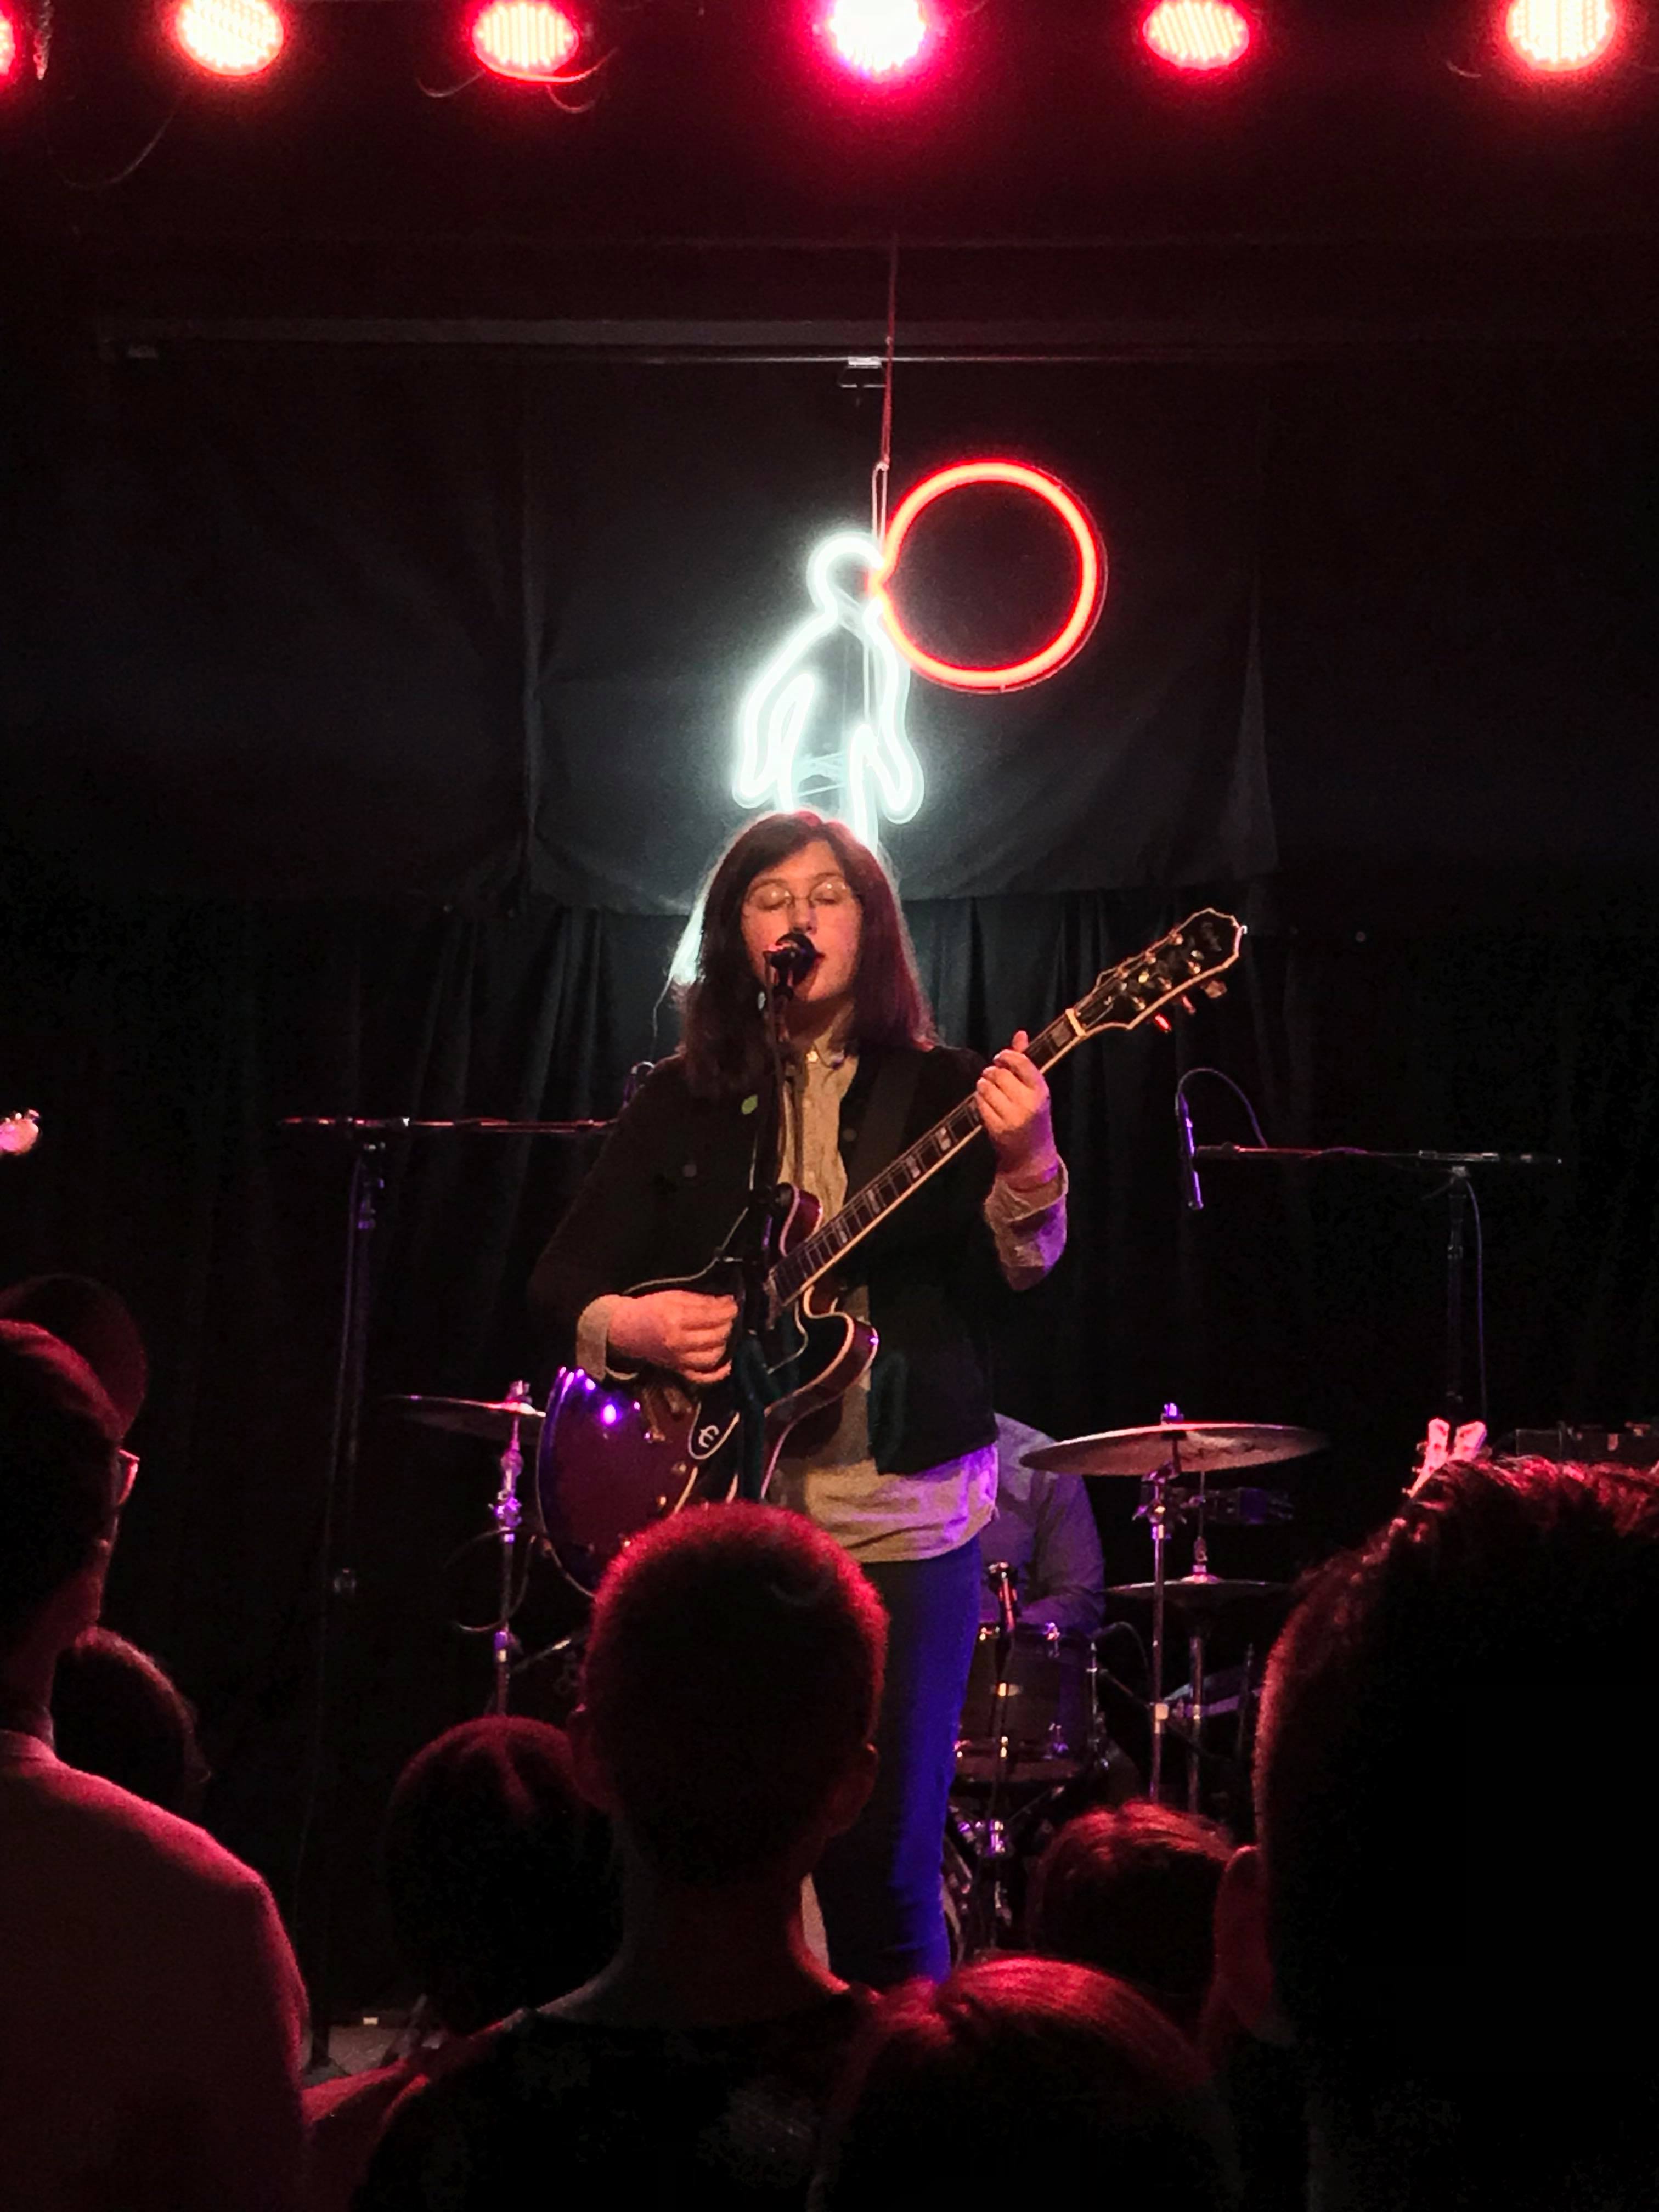 Lucy Dacus: “Night Shift” Track Review